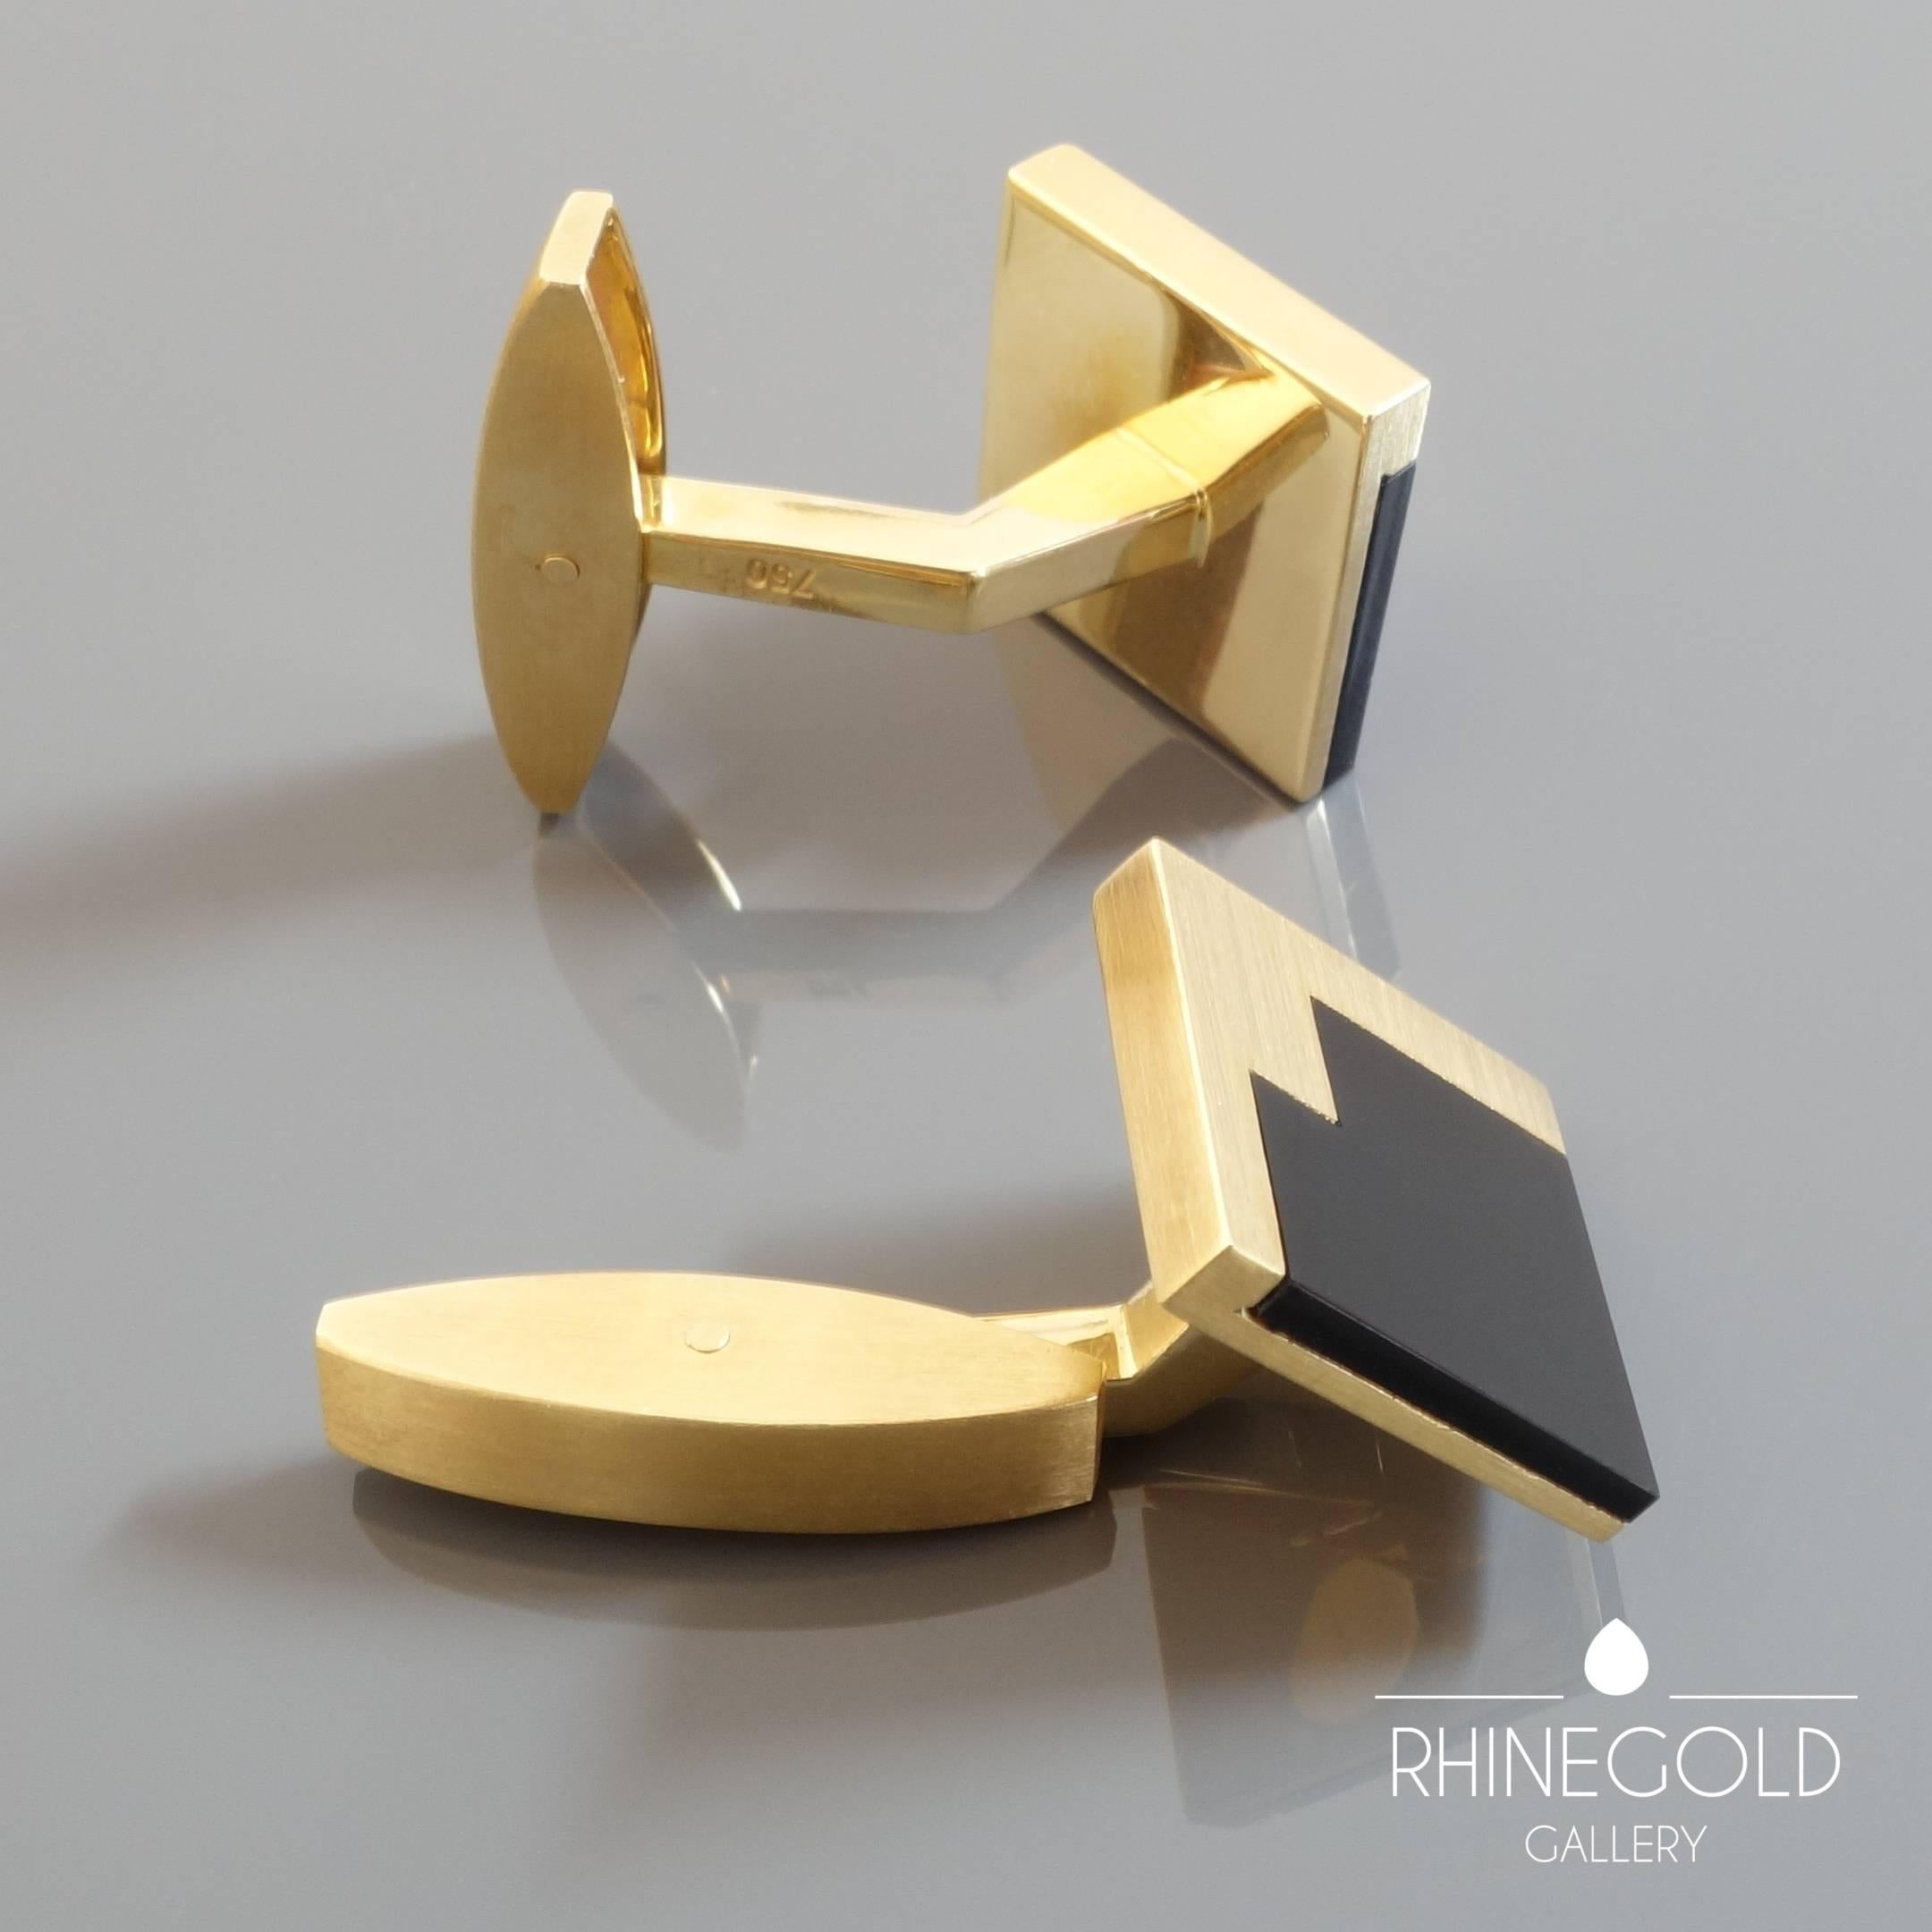 Emil Krauss Post-Modernist Onyx Gold Cufflinks
18k yellow gold, onyx
Fronts 1.5cm by 1.5 cm (approx. 5/8” by 5/8”) 
Weight approx. 20.7 grams
Marks: maker’s mark; gold content mark ‘750’ for 18k gold
Germany, 1980s – 1990s

Solidly worked from 18k